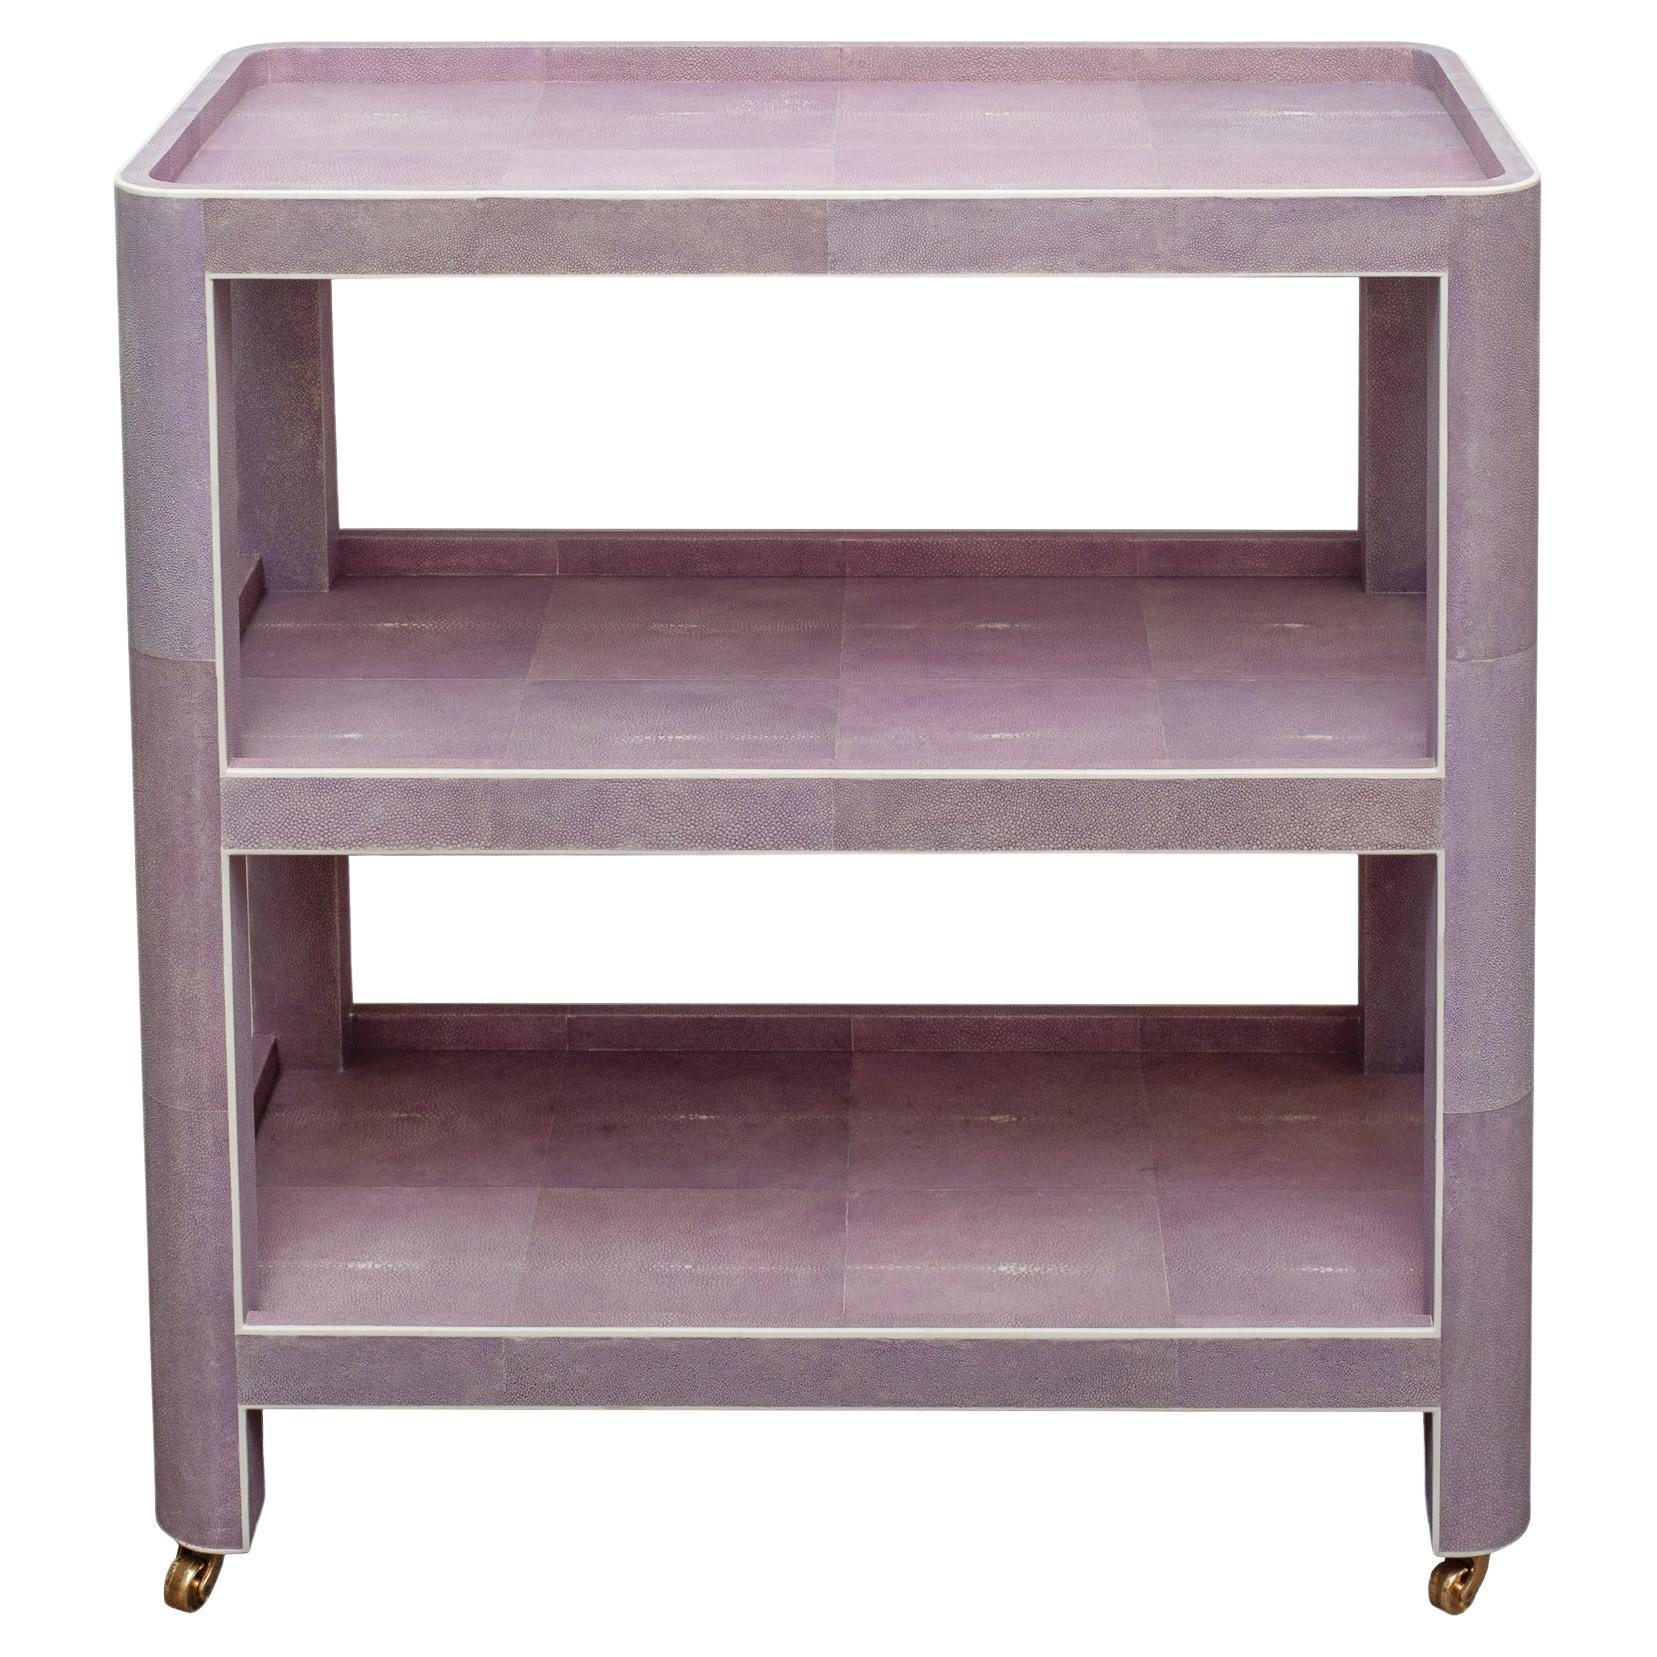 Contemporary Three Tiered Bar Cart in Lavender Shagreen